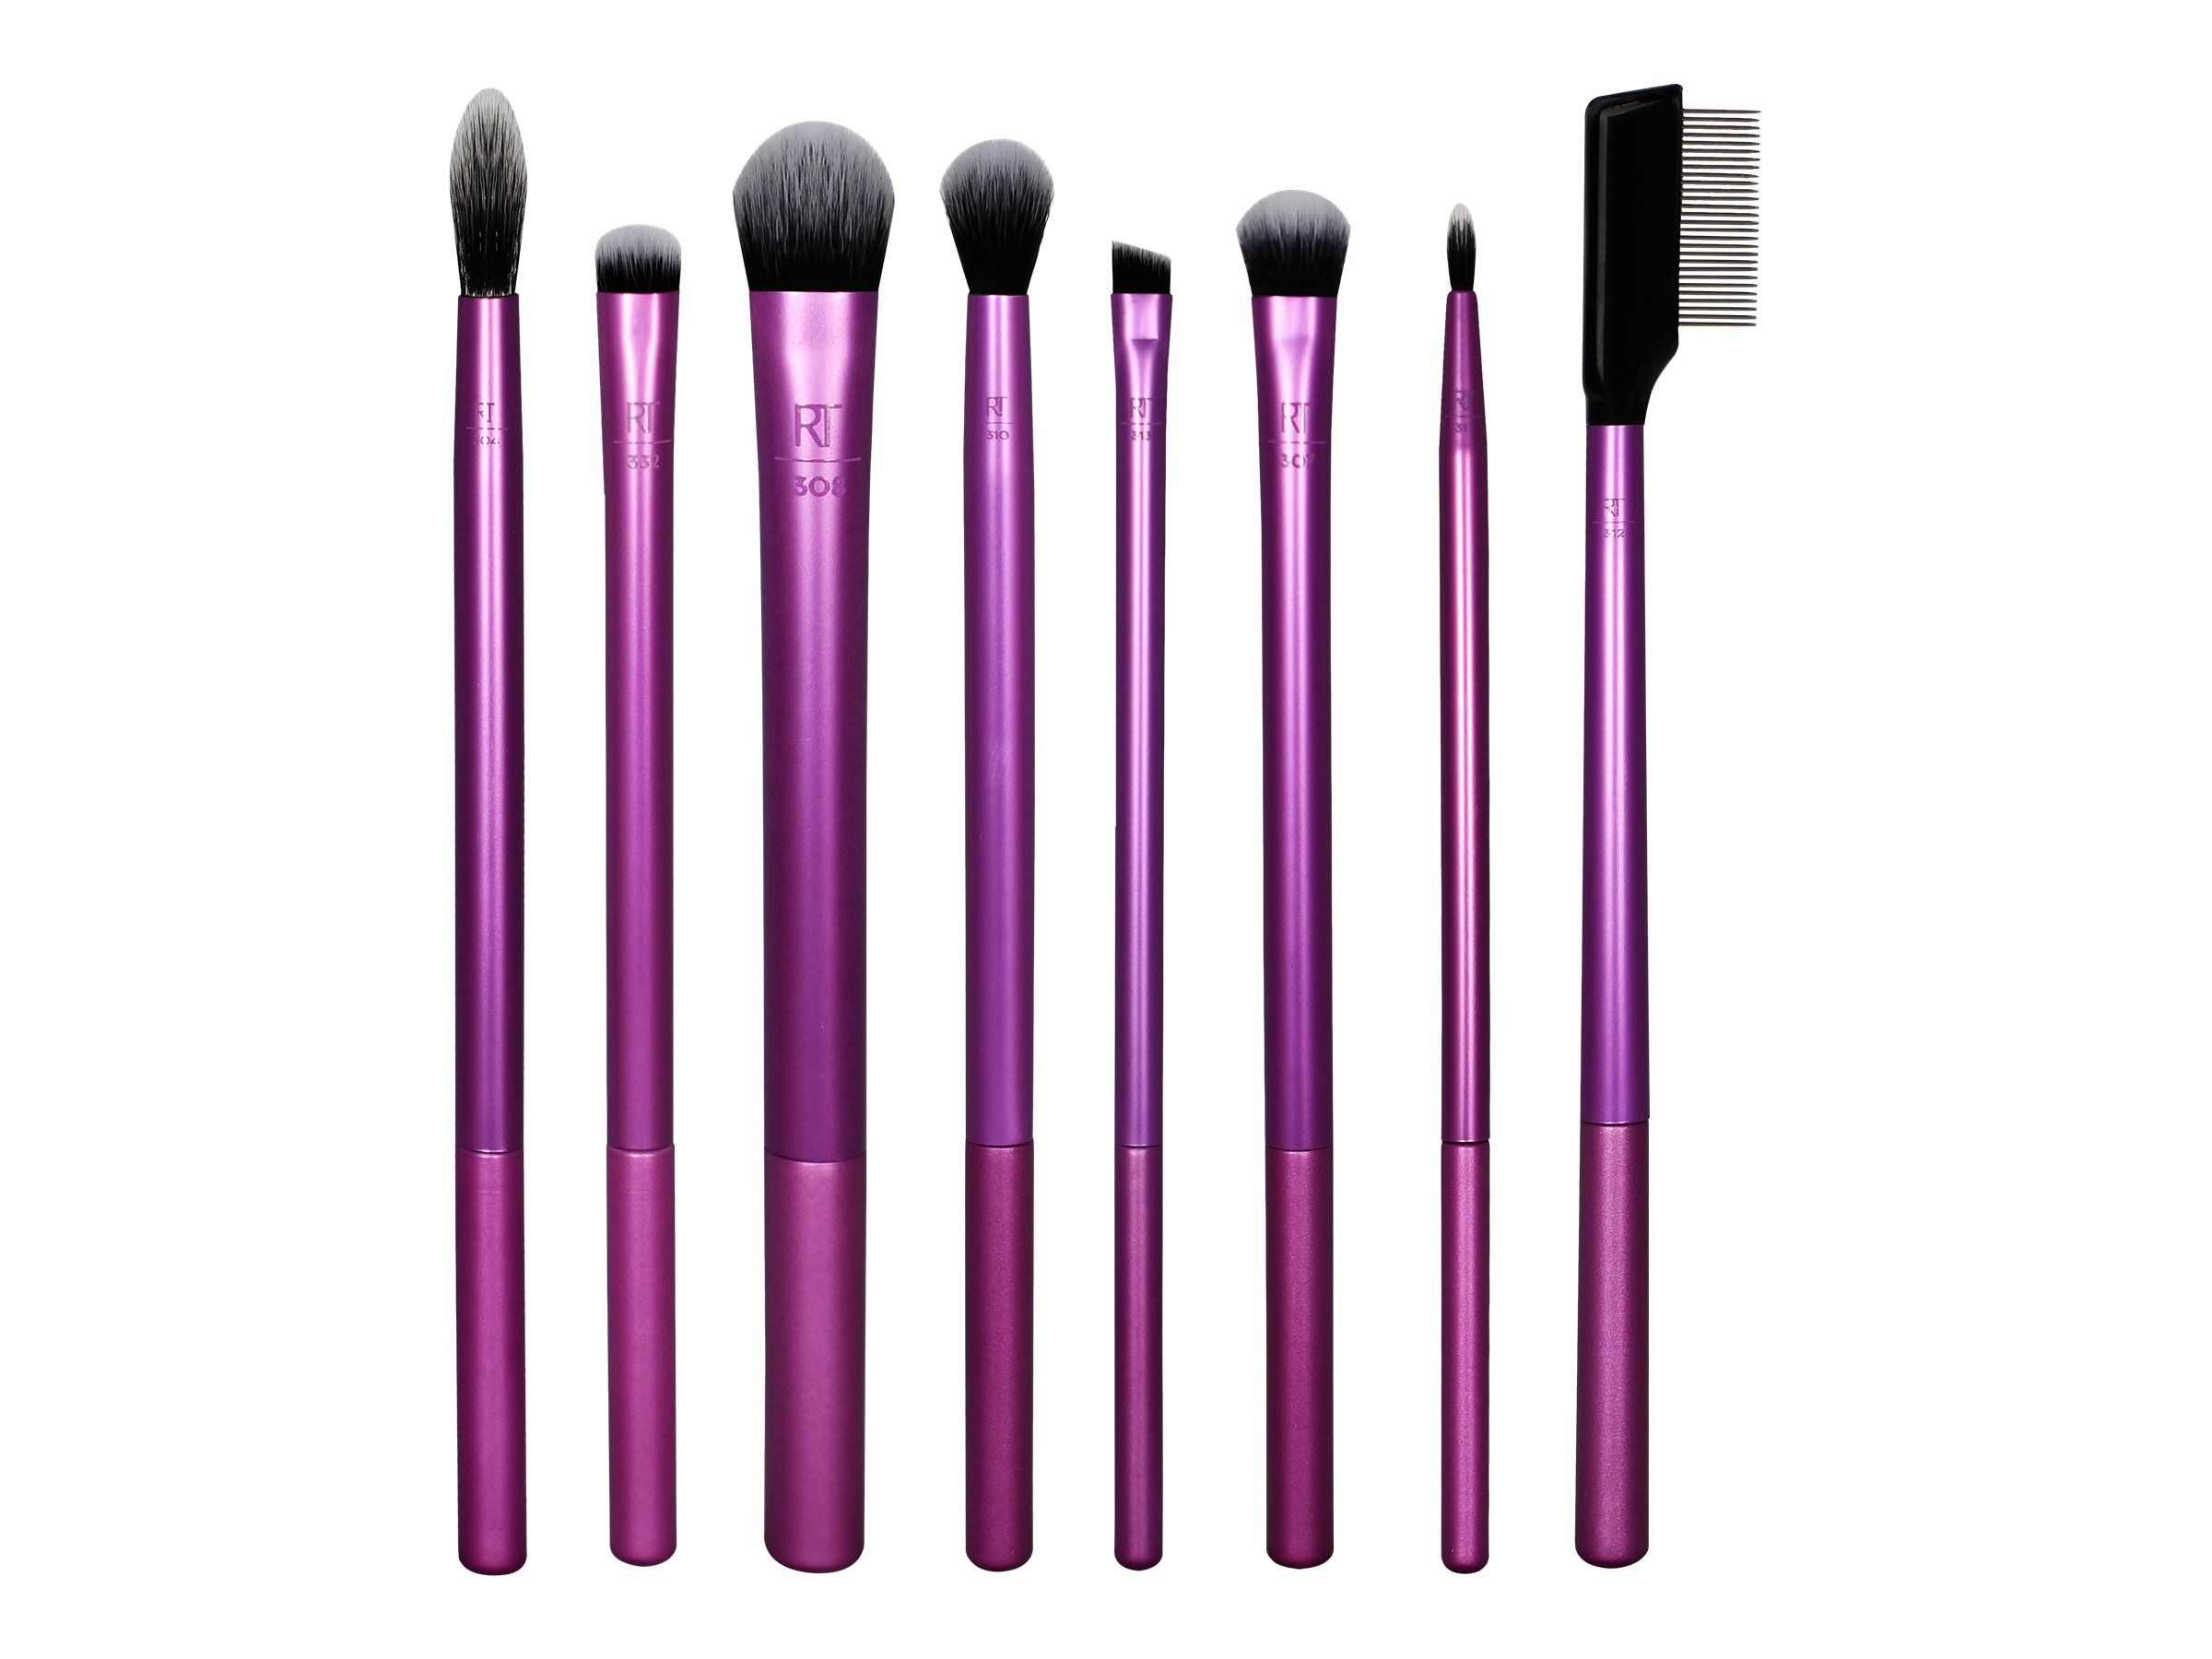 Real Techniques Everyday Eye Essentials Makeup Brush Kit - 8 piece